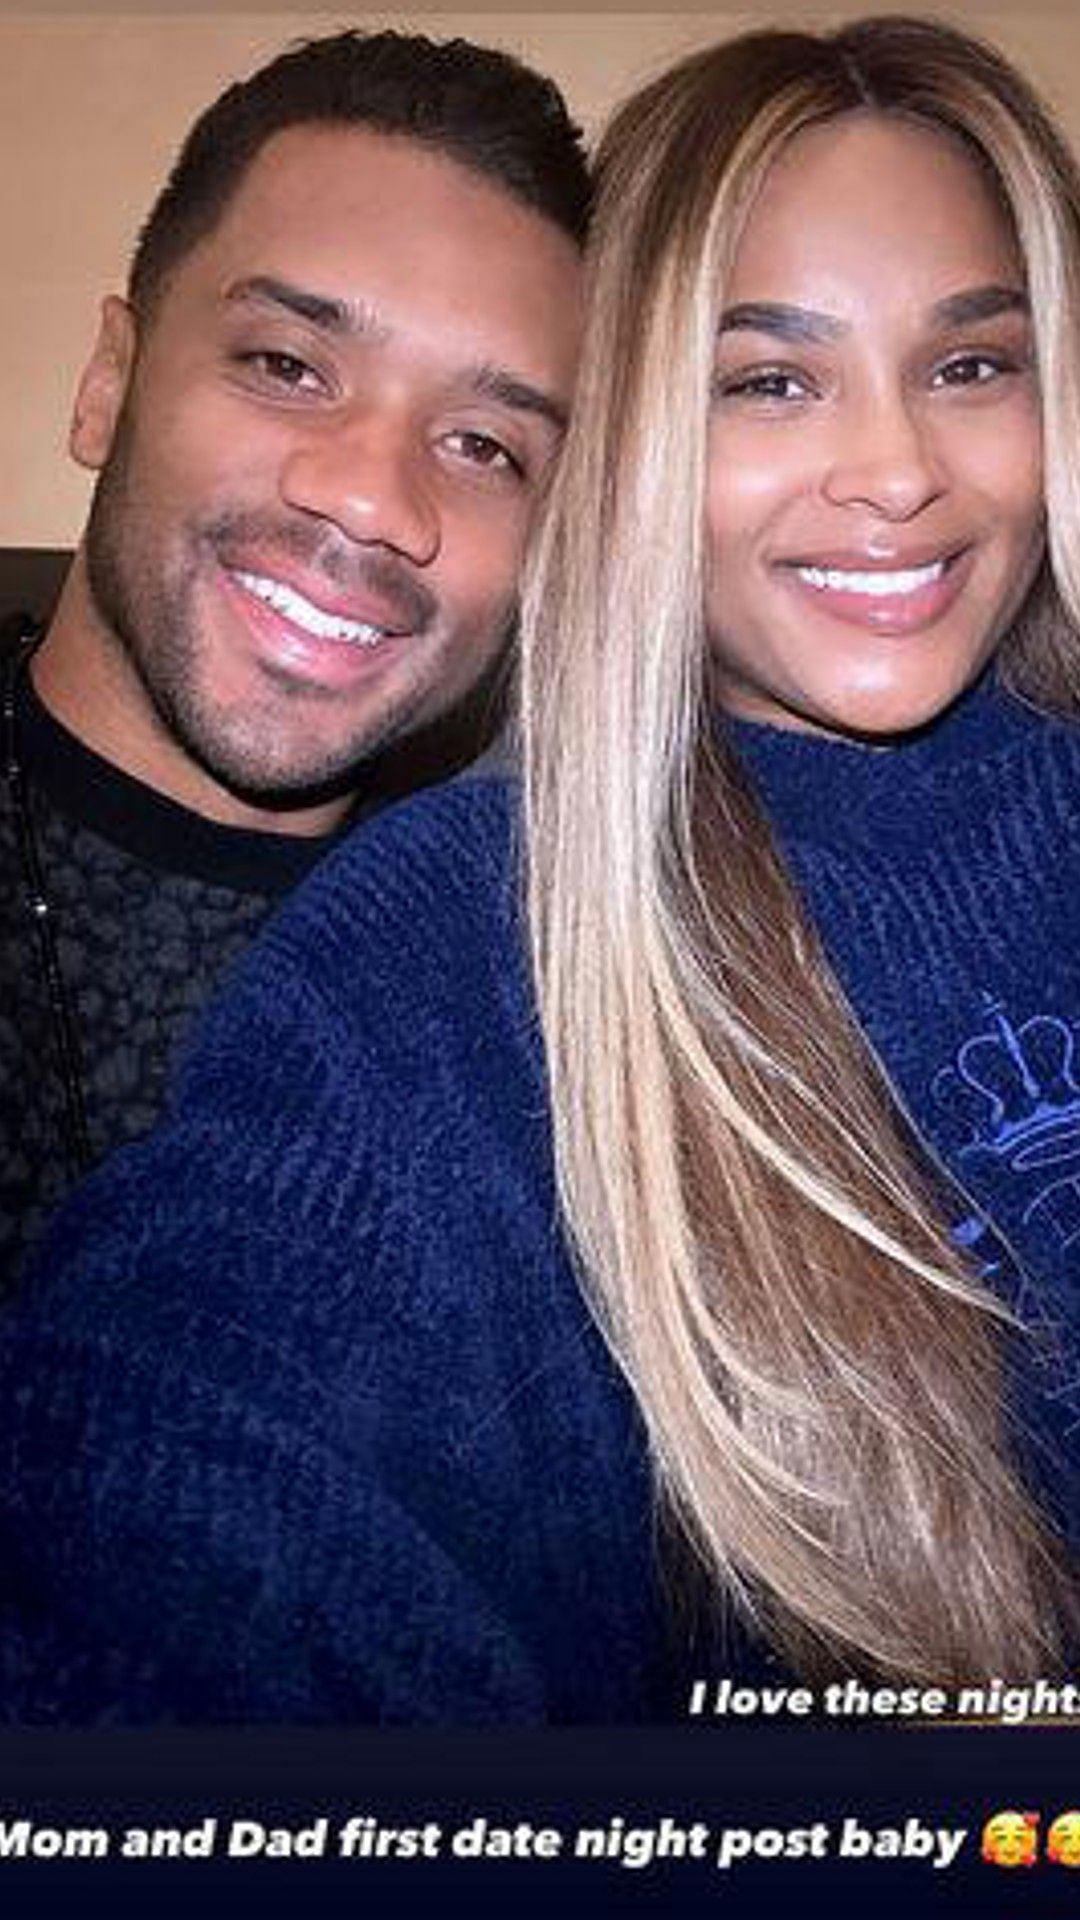 Russell Wilson and Ciara celebrate a special date night.